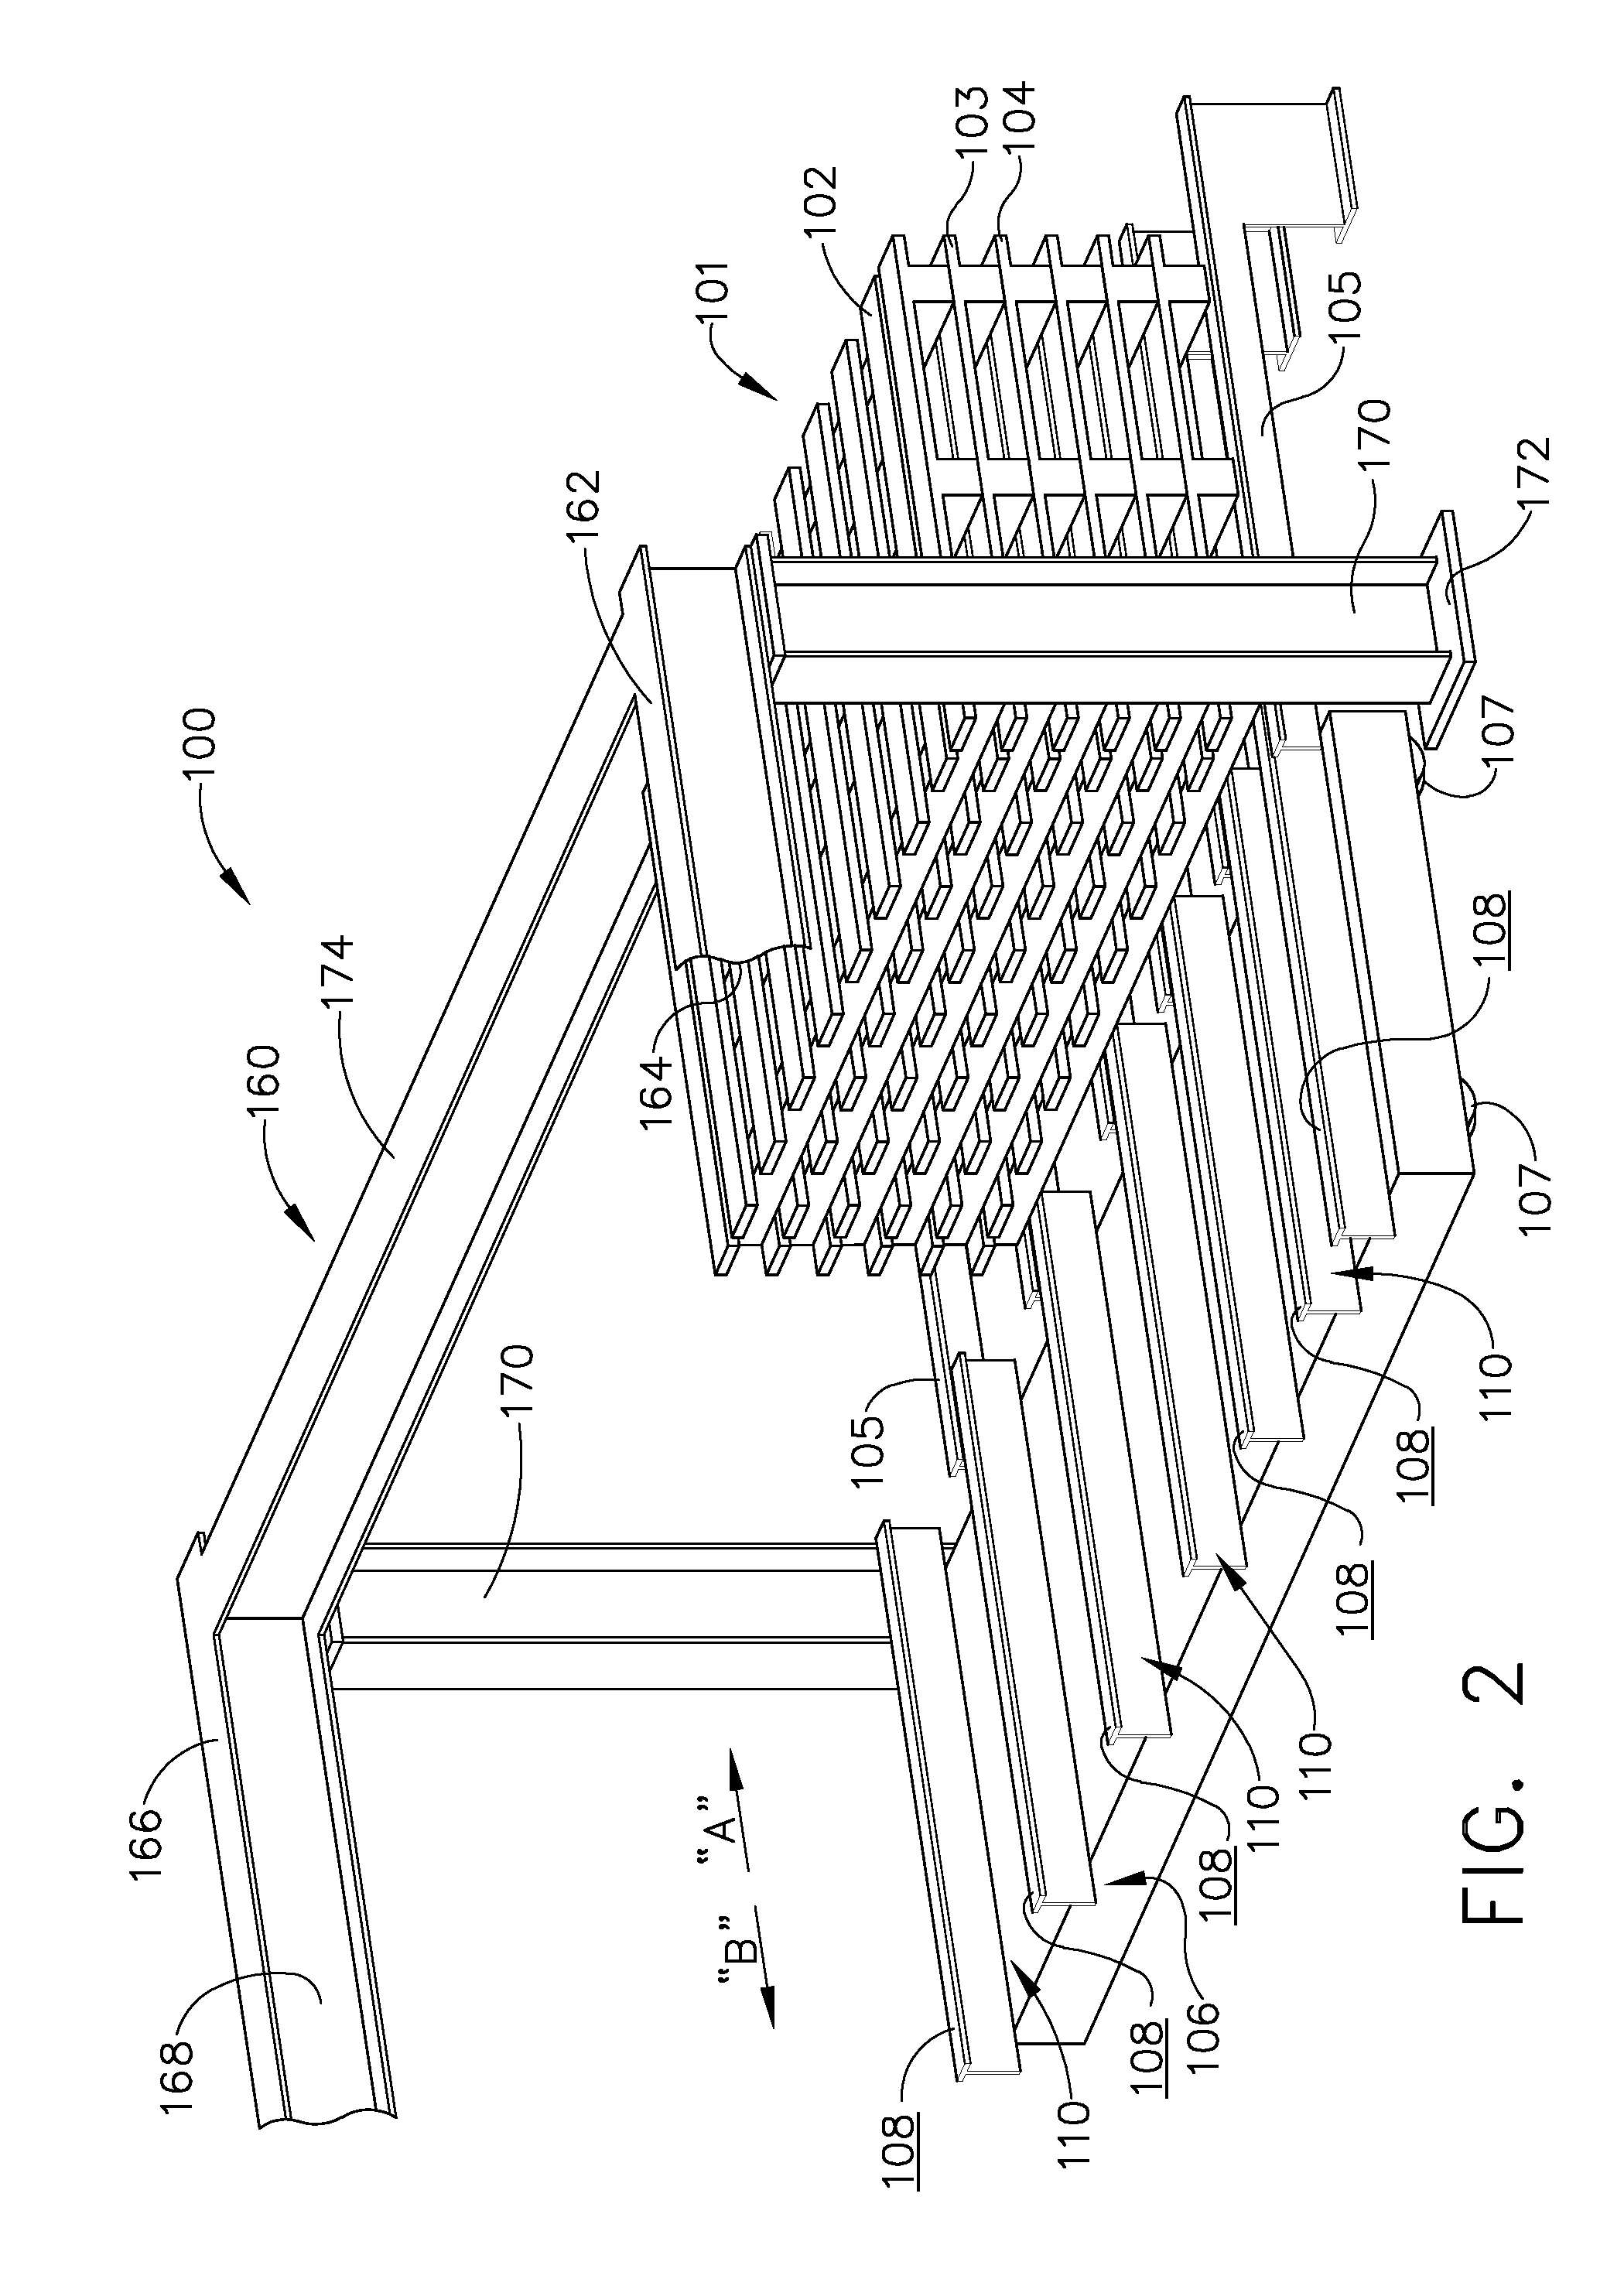 Method and apparatus for stacking sheet materials